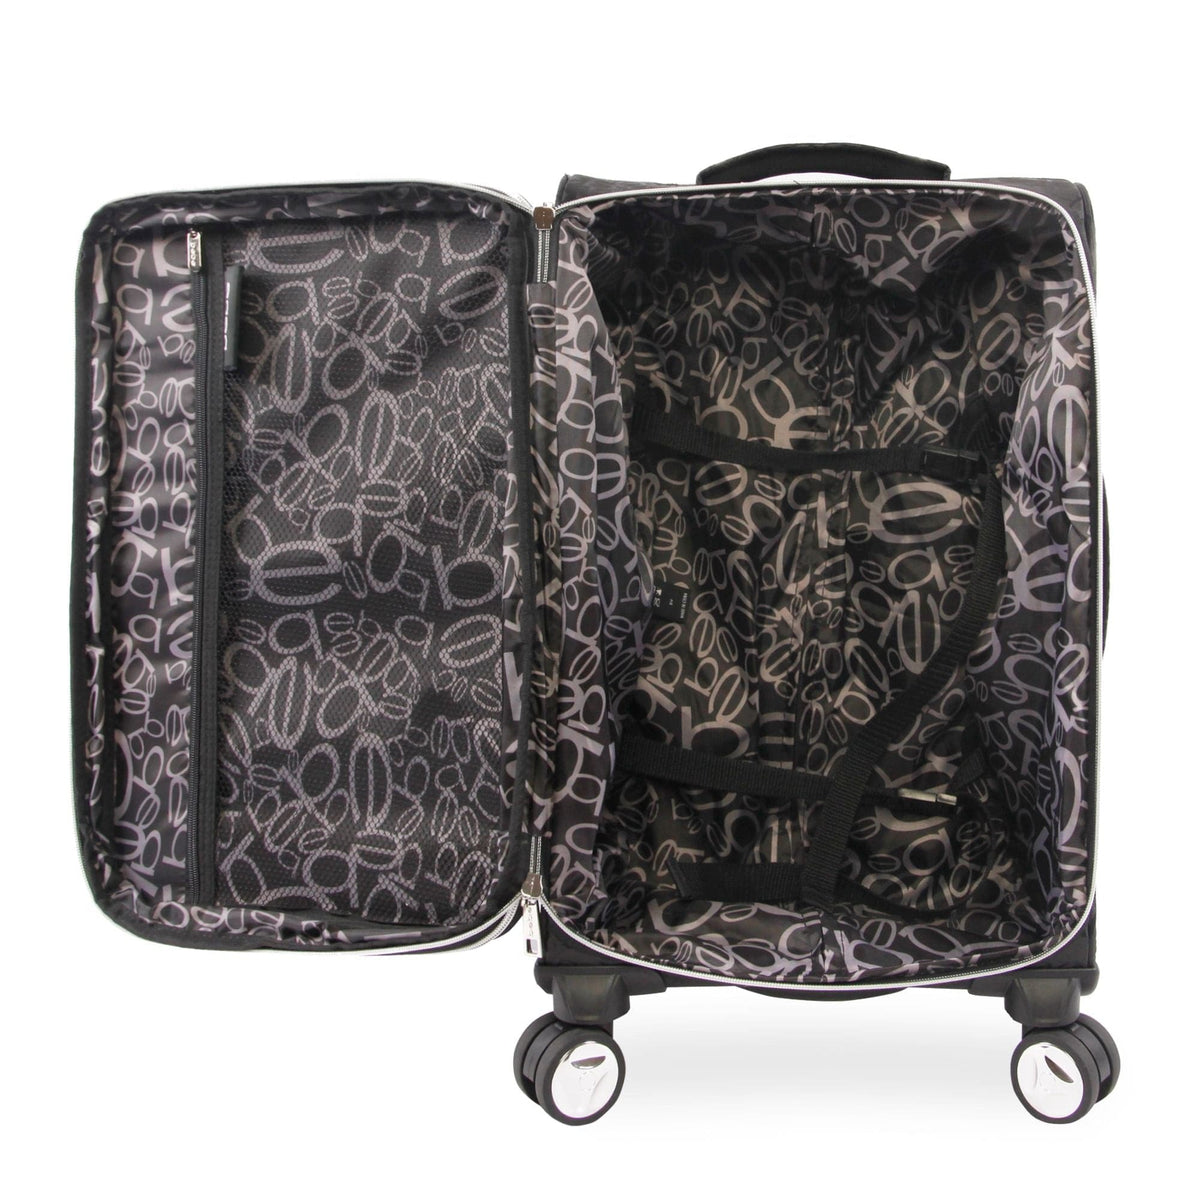 BEBE Carissa 21" Expandable Spinner Carry-On Luggage